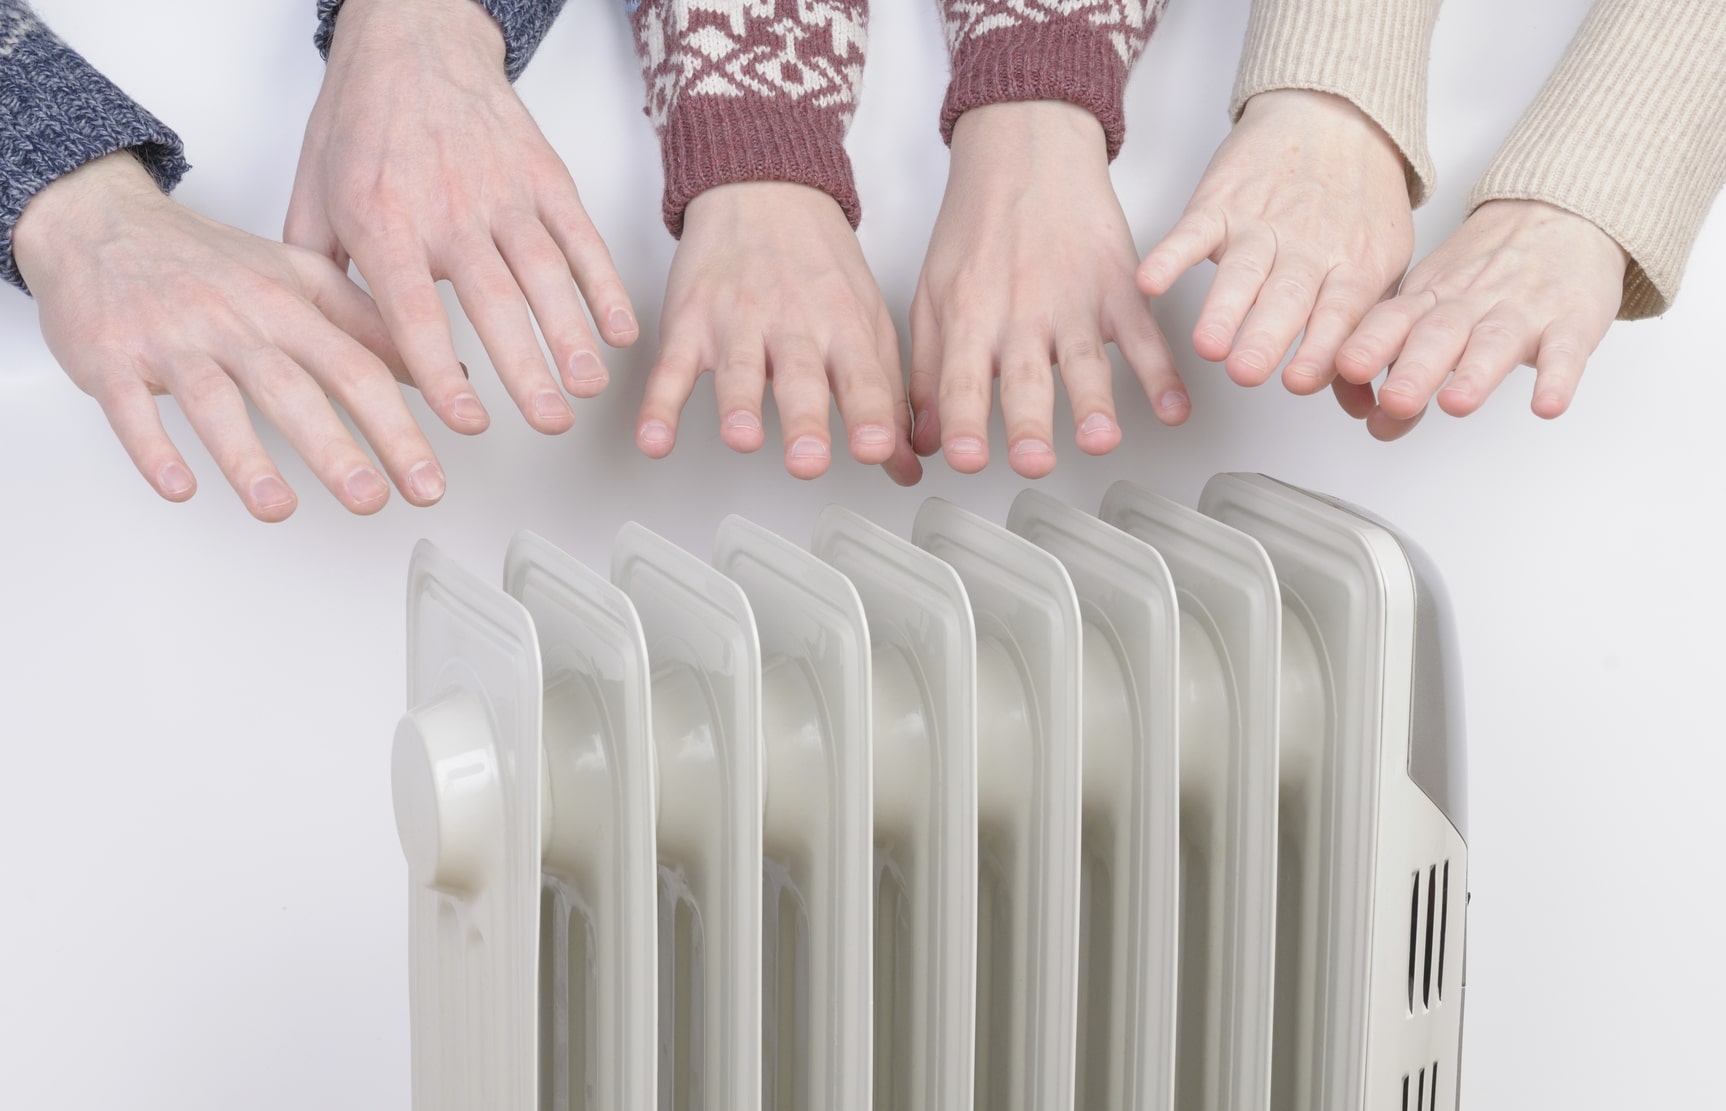 Family warming hands over electric heater